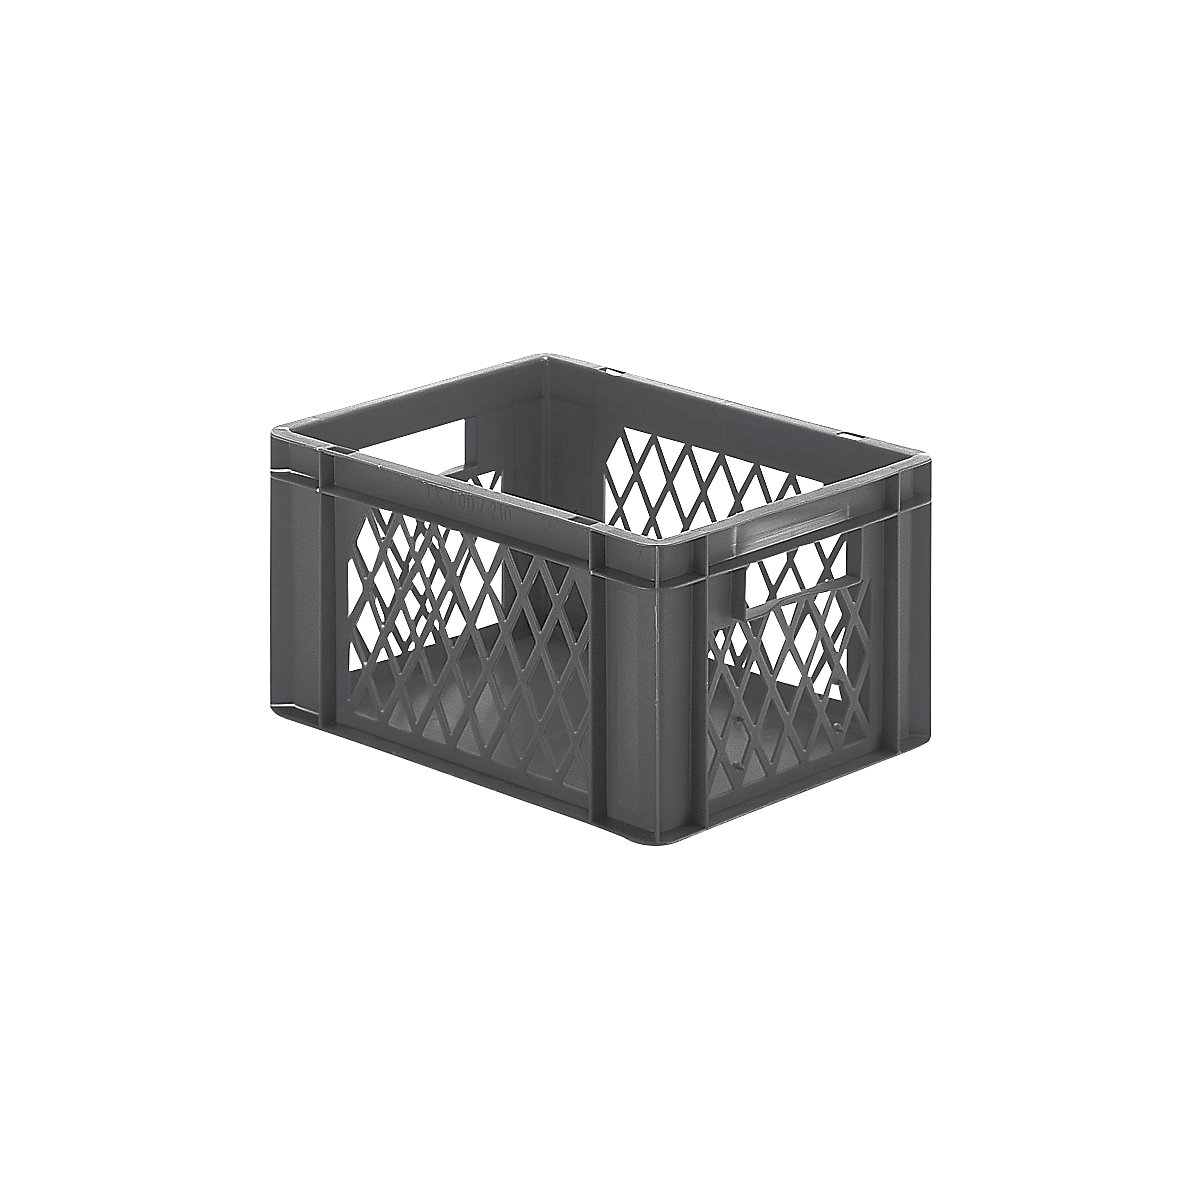 Euro stacking container, perforated walls, closed base, LxWxH 400 x 300 x 210 mm, grey, pack of 5